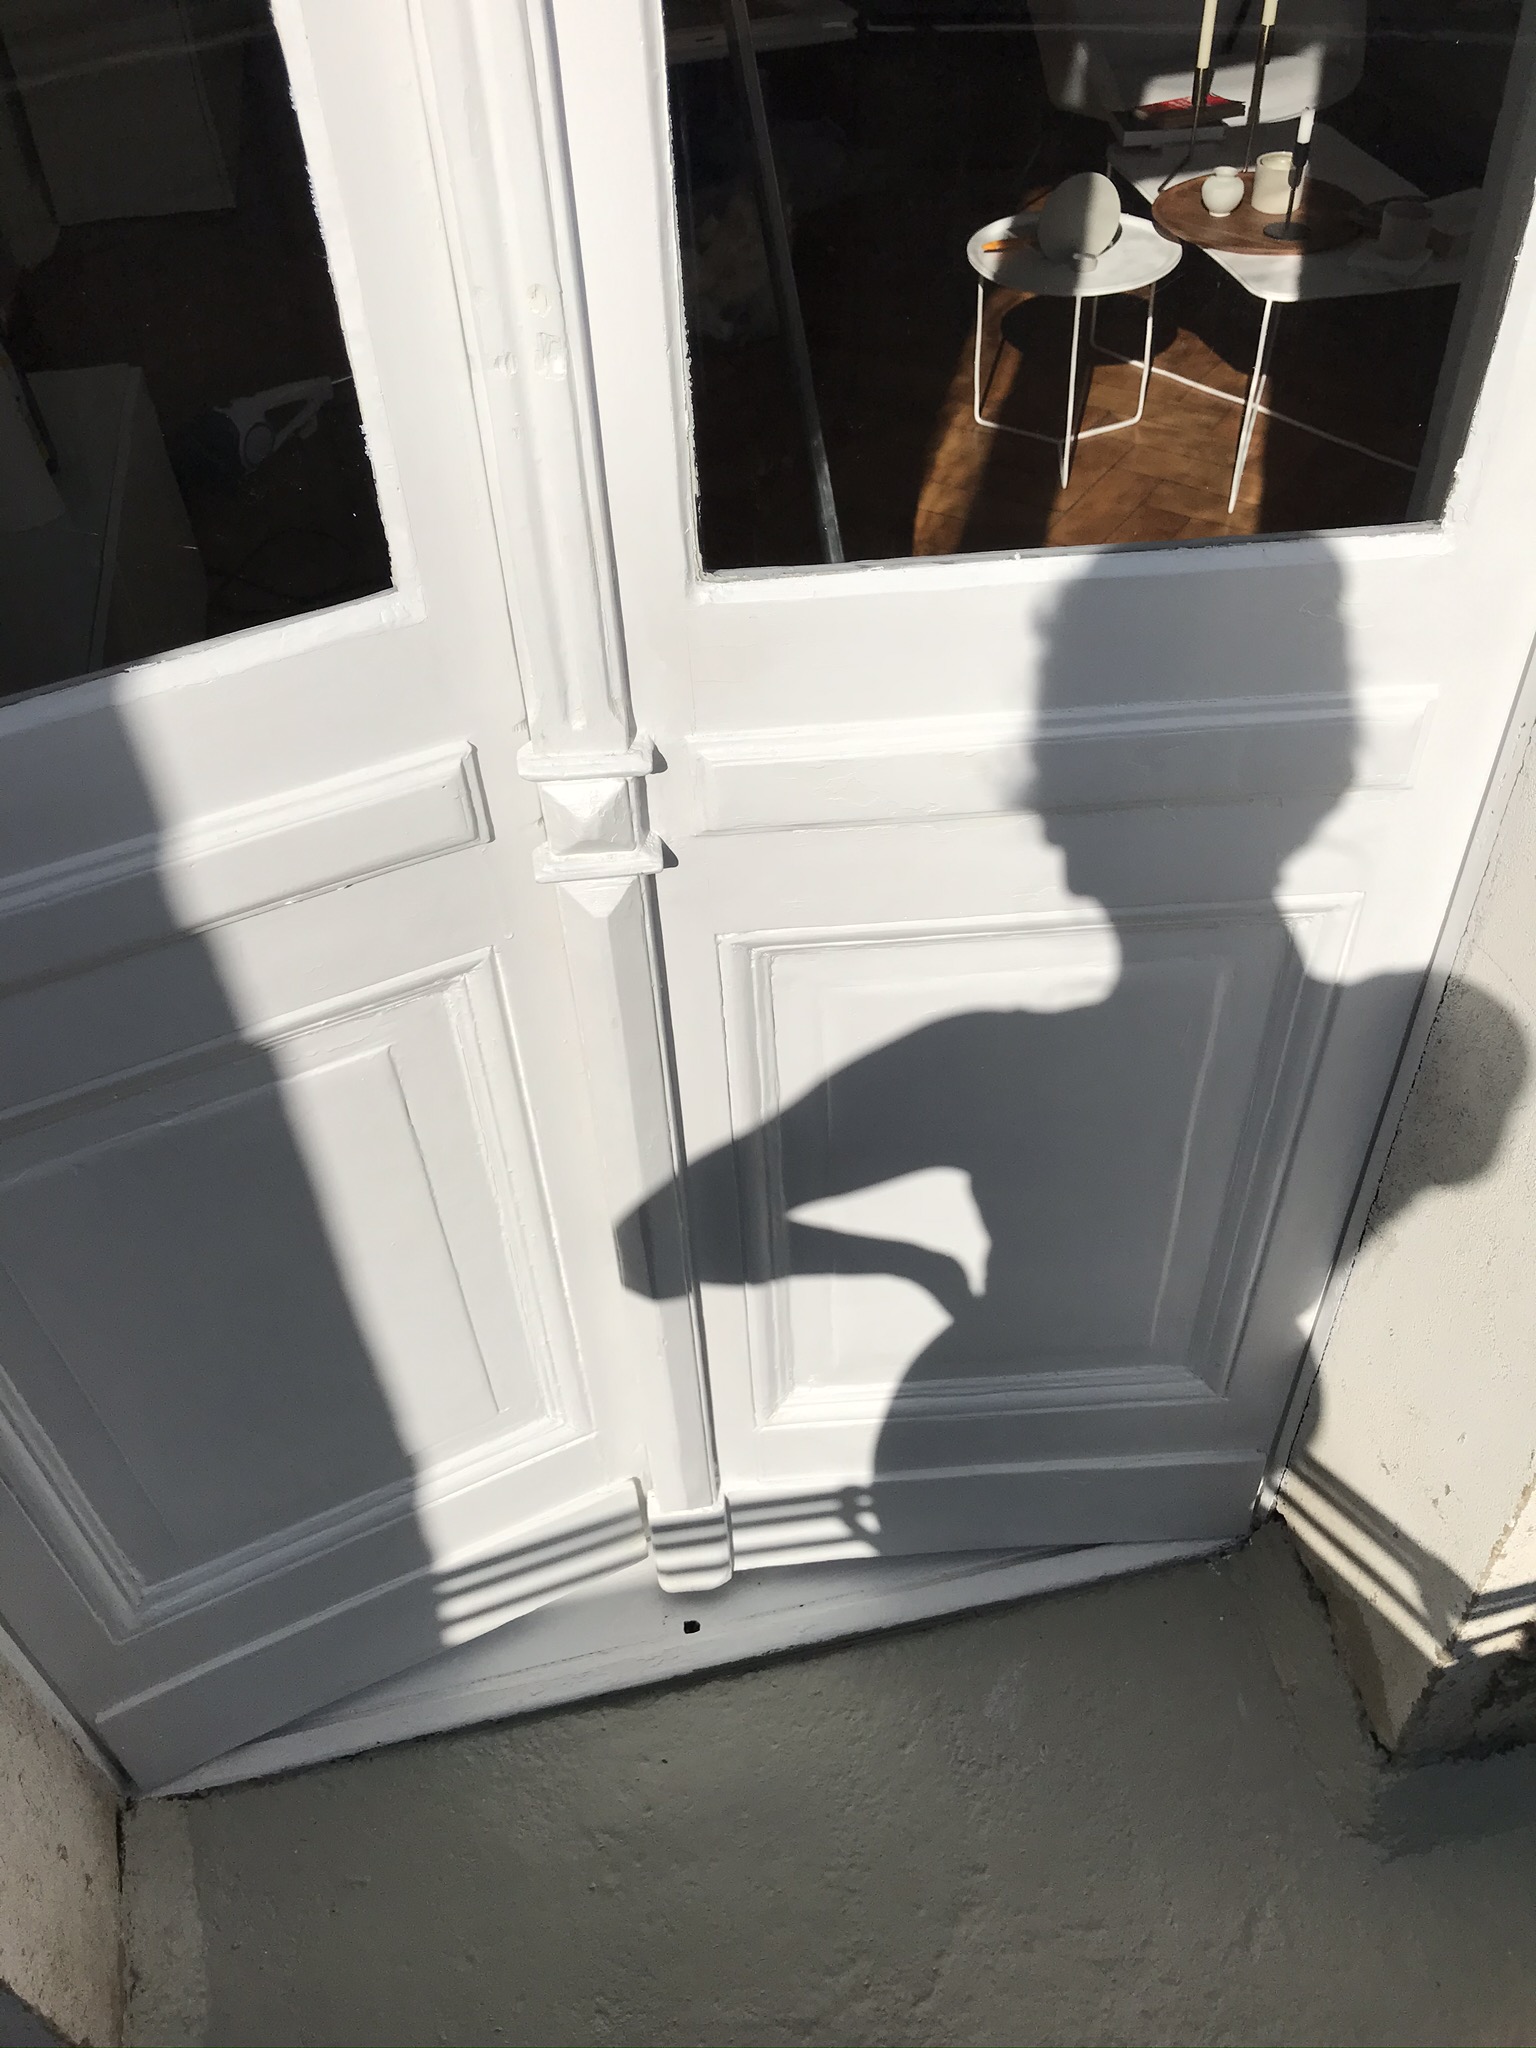 shadow play, style, home, white doors, simple slow living, playful, mood | RG Daily Blog